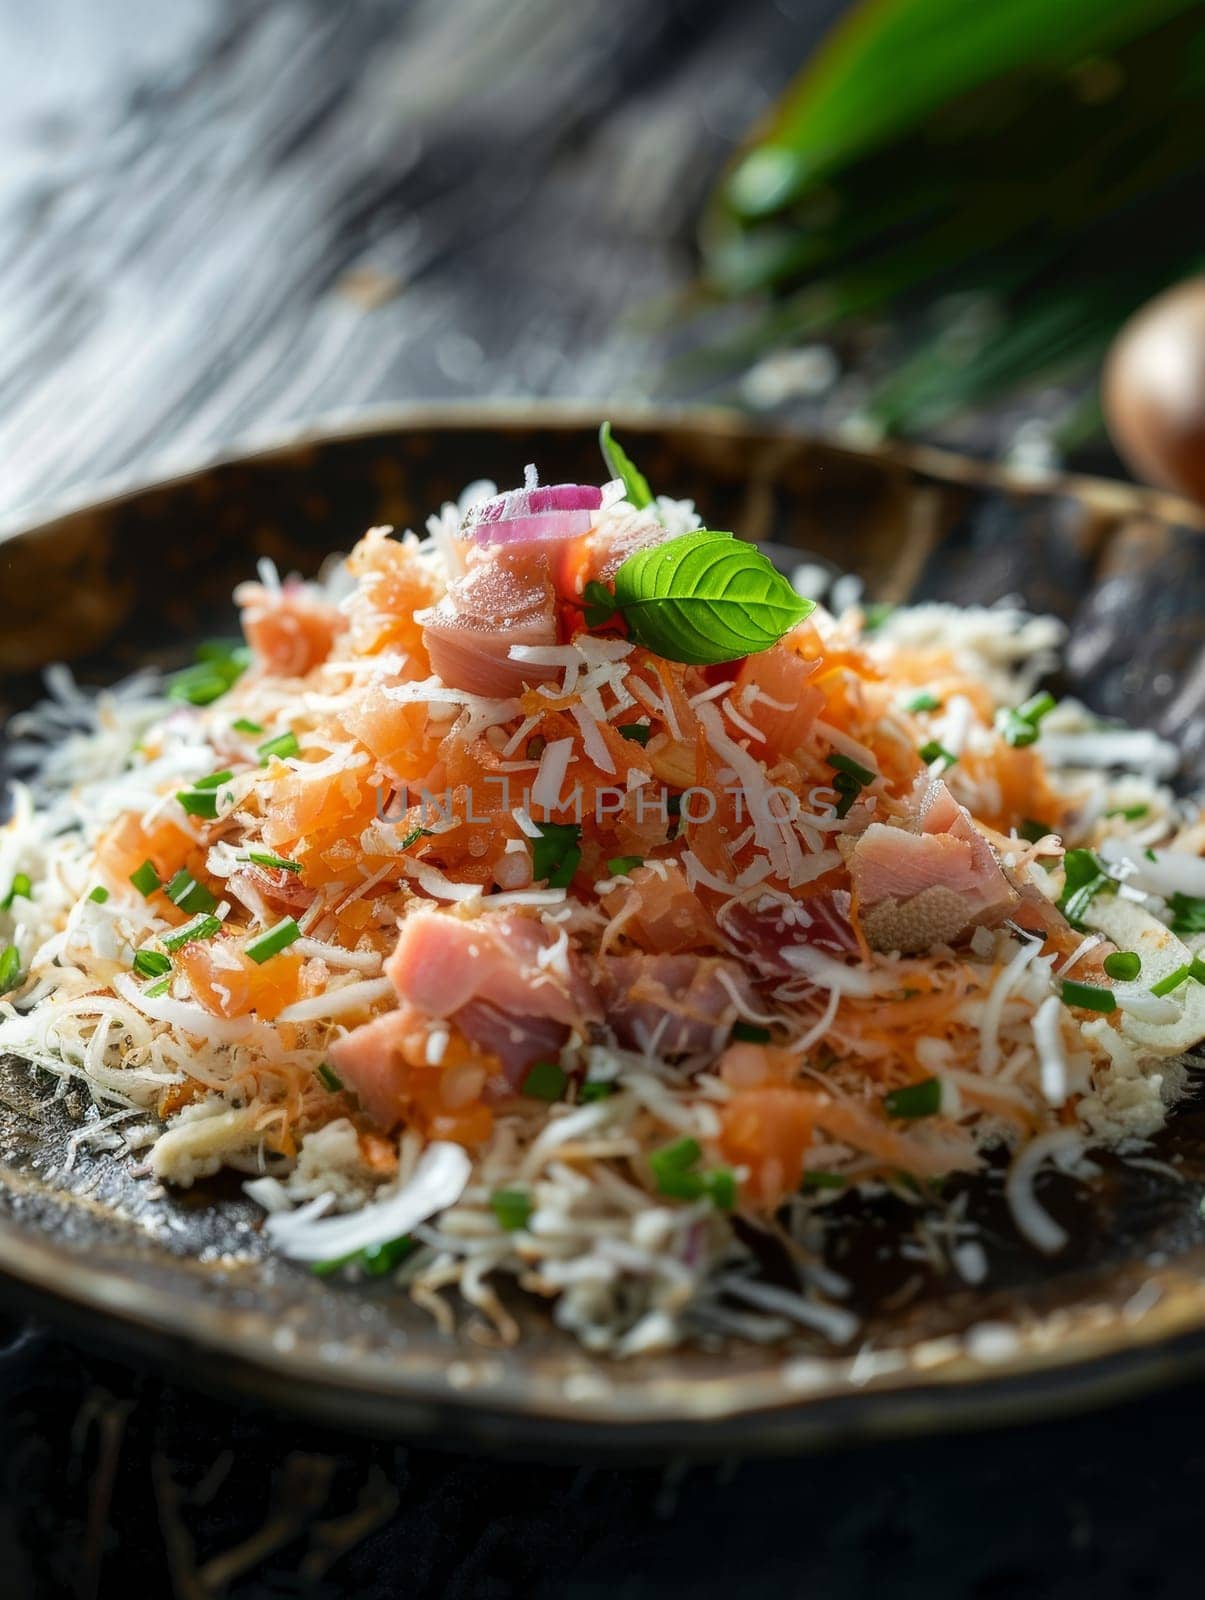 Maldivian mas huni, shredded smoked tuna mixed with coconut and onions, served on a small plate. A traditional and flavorful dish from the Maldives